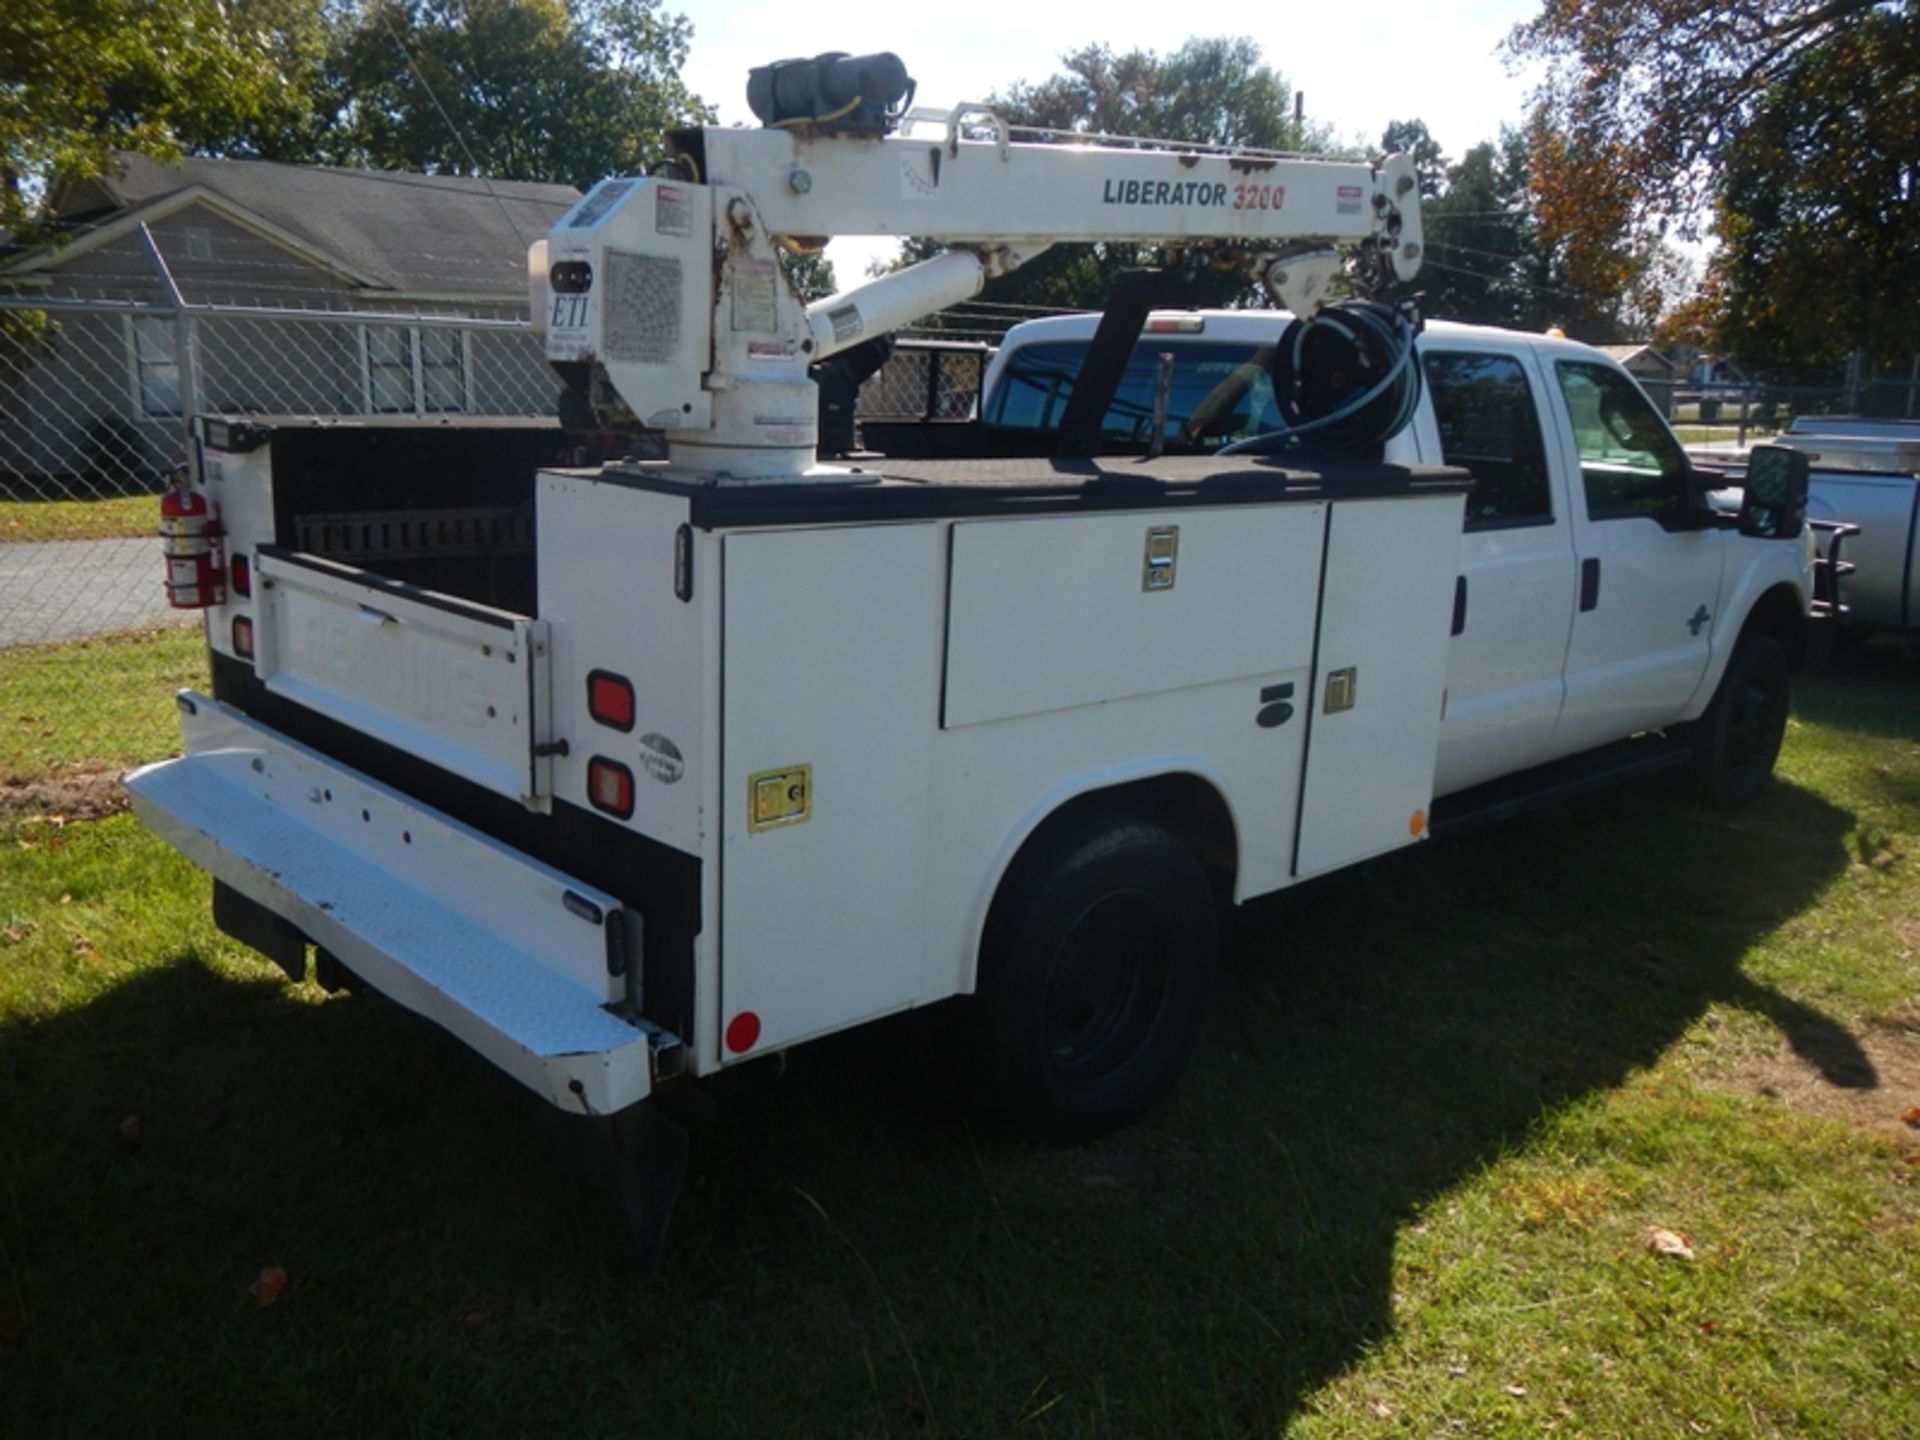 2012 FORD F-350 6.7L dsl, crew cab, 4wd, utility body with crane and air compressor - 314,136 - Image 3 of 9